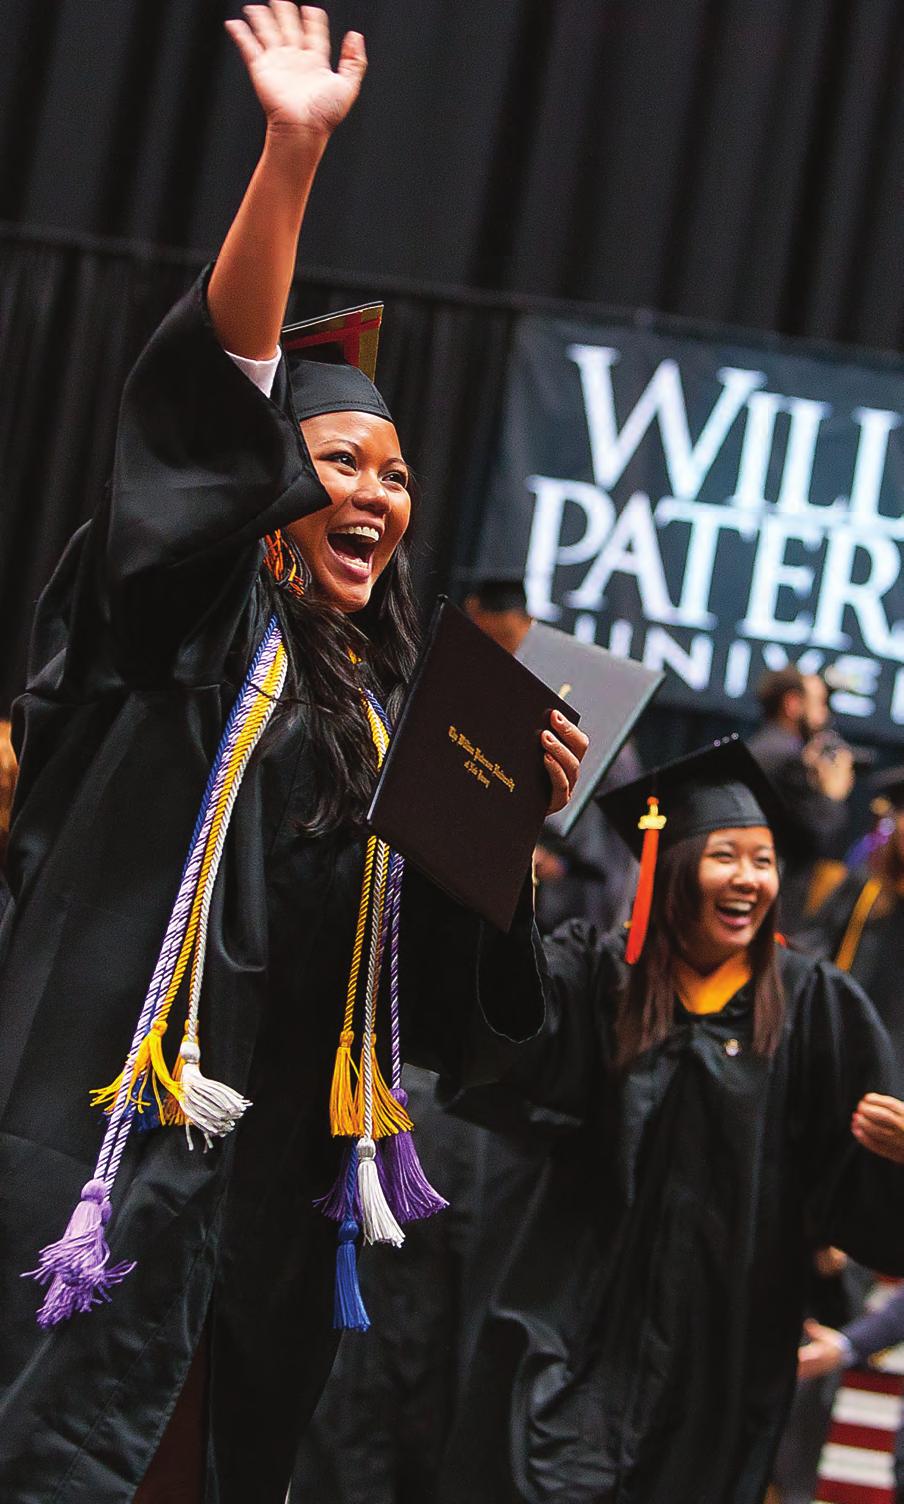 Vision: The University In 2022 William Paterson University will be widely recognized as the model of outstanding and affordable public higher education characterized by rigorous academic preparation